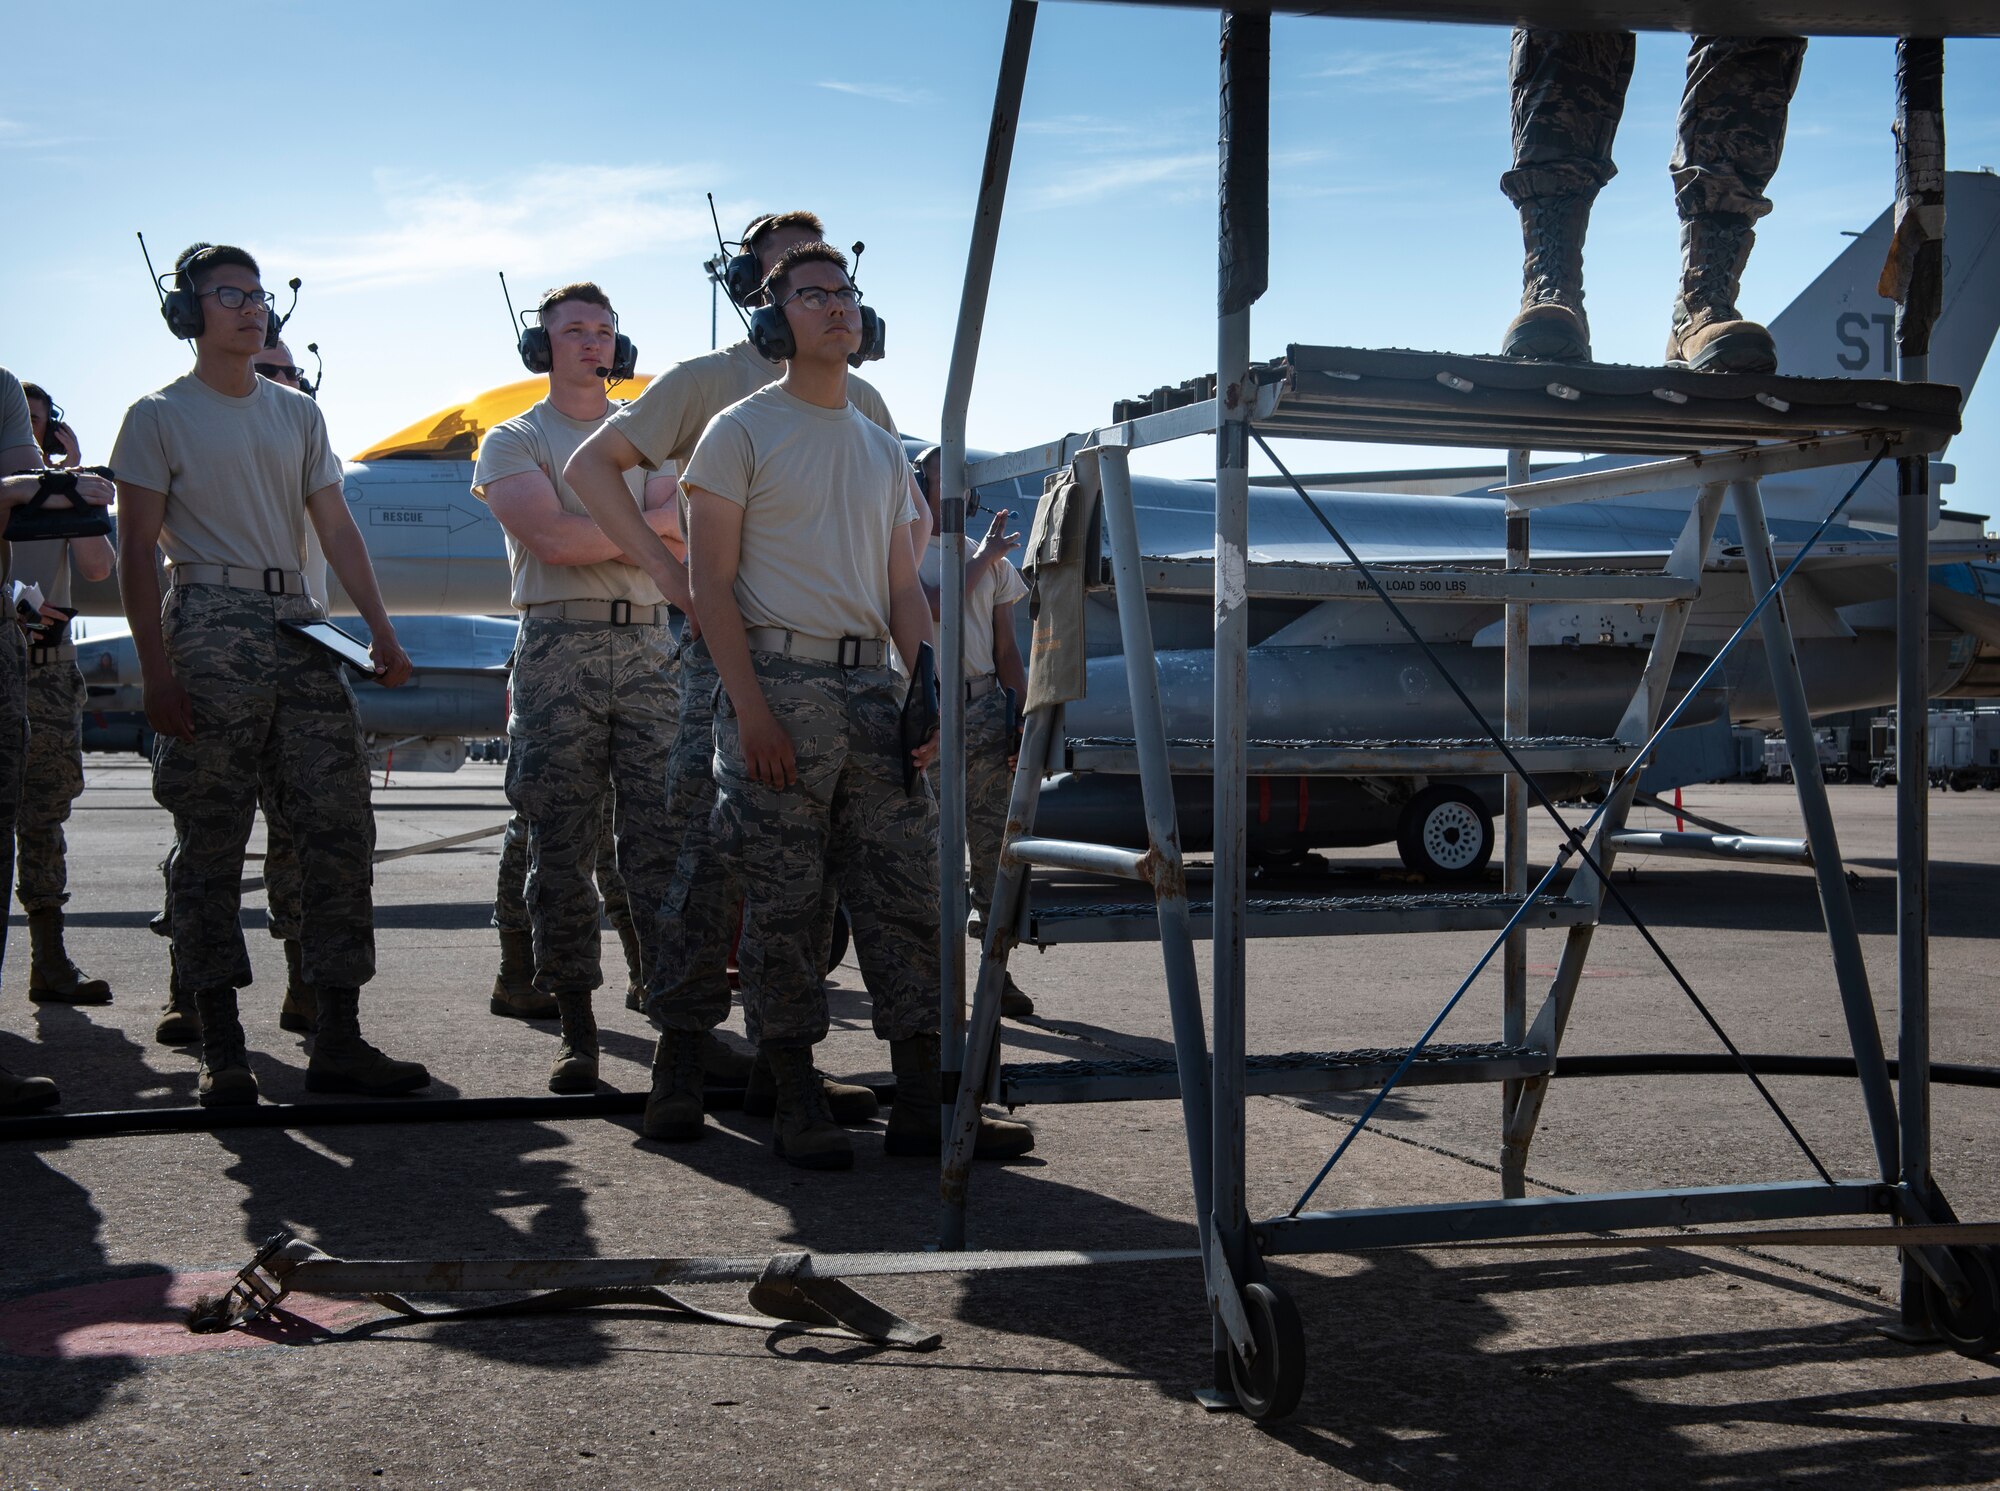 362nd Training Squadron F-16 crew chief apprentice course students stand in line at Sheppard Air Force Base, Texas, July 2, 2019. The students are waiting their turn to see their instructor in the F-16's flightdeck, who will show them the lights operations check checklist and show how the flightdeck works. (U.S. Air Force photo by Airman 1st Class Pedro Tenorio)